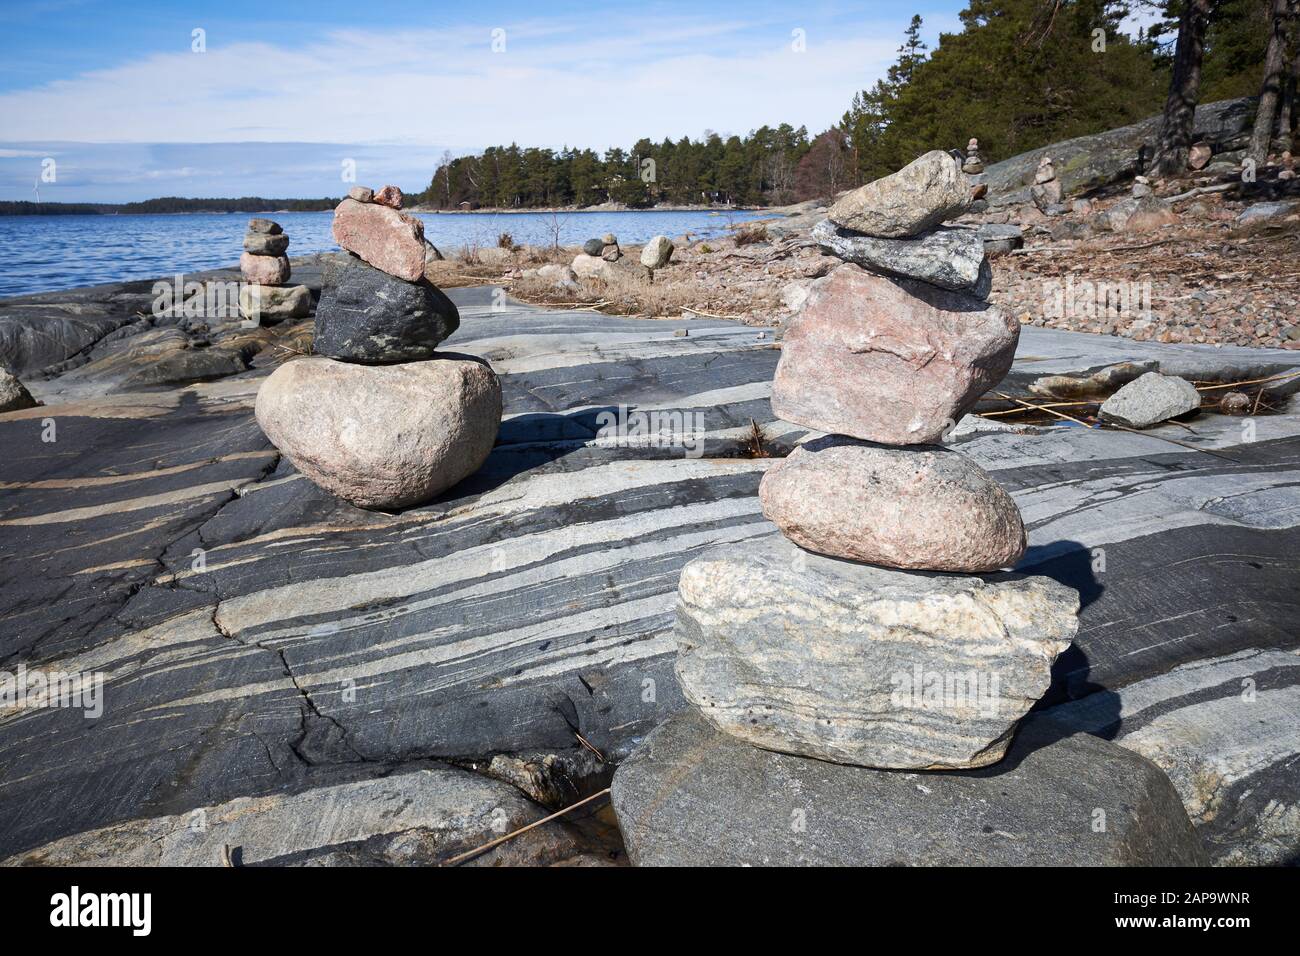 Peaceful summer landscape by the Baltic Sea in Kasnas, Kemio, Finland. Wide angle shot of the rocks on the seashore in the Finnish archipelago. Stock Photo